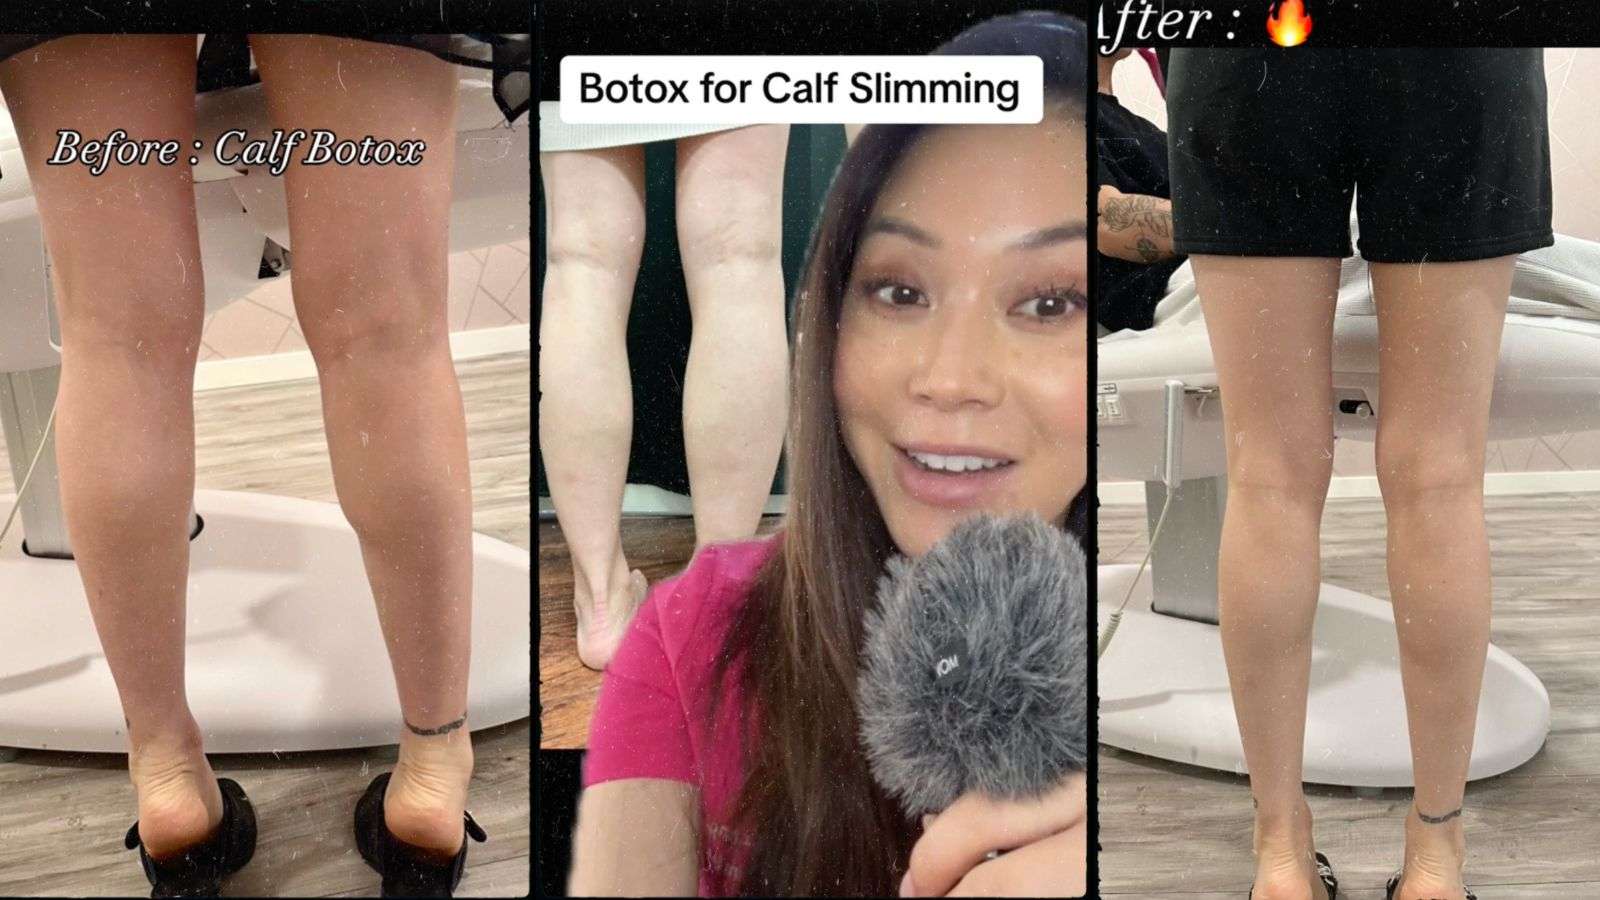 Ozempic for legs? 'Calf tox' is newest slimming fad on TikTok